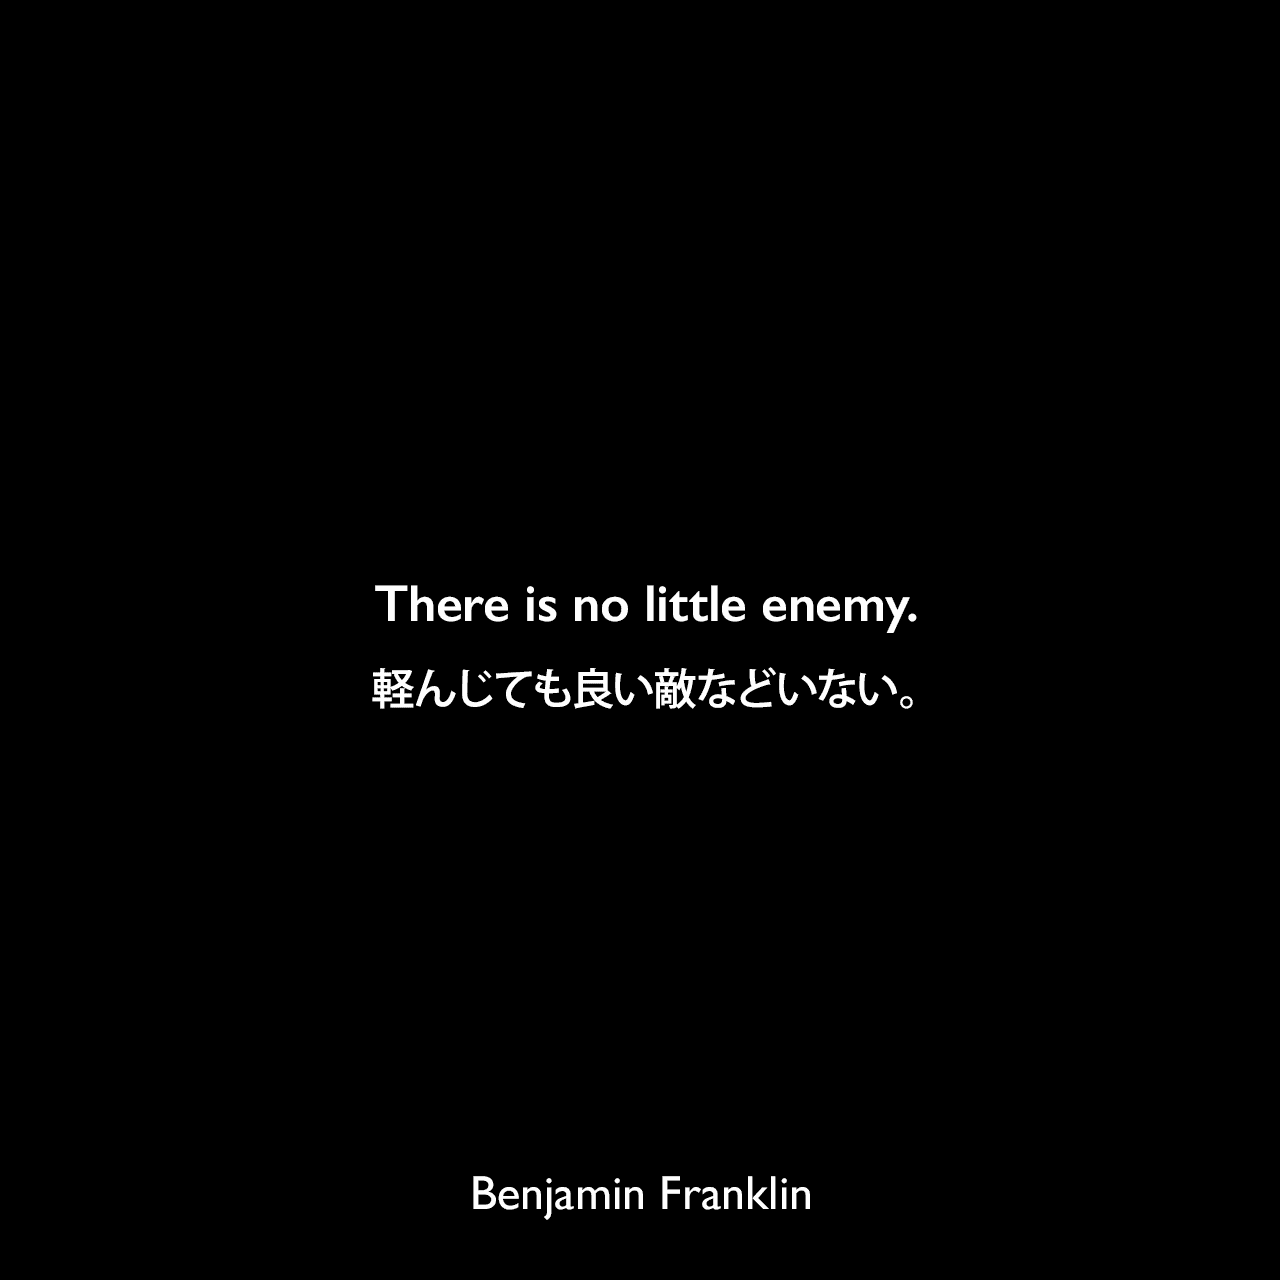 There is no little enemy.軽んじても良い敵などいない。Benjamin Franklin